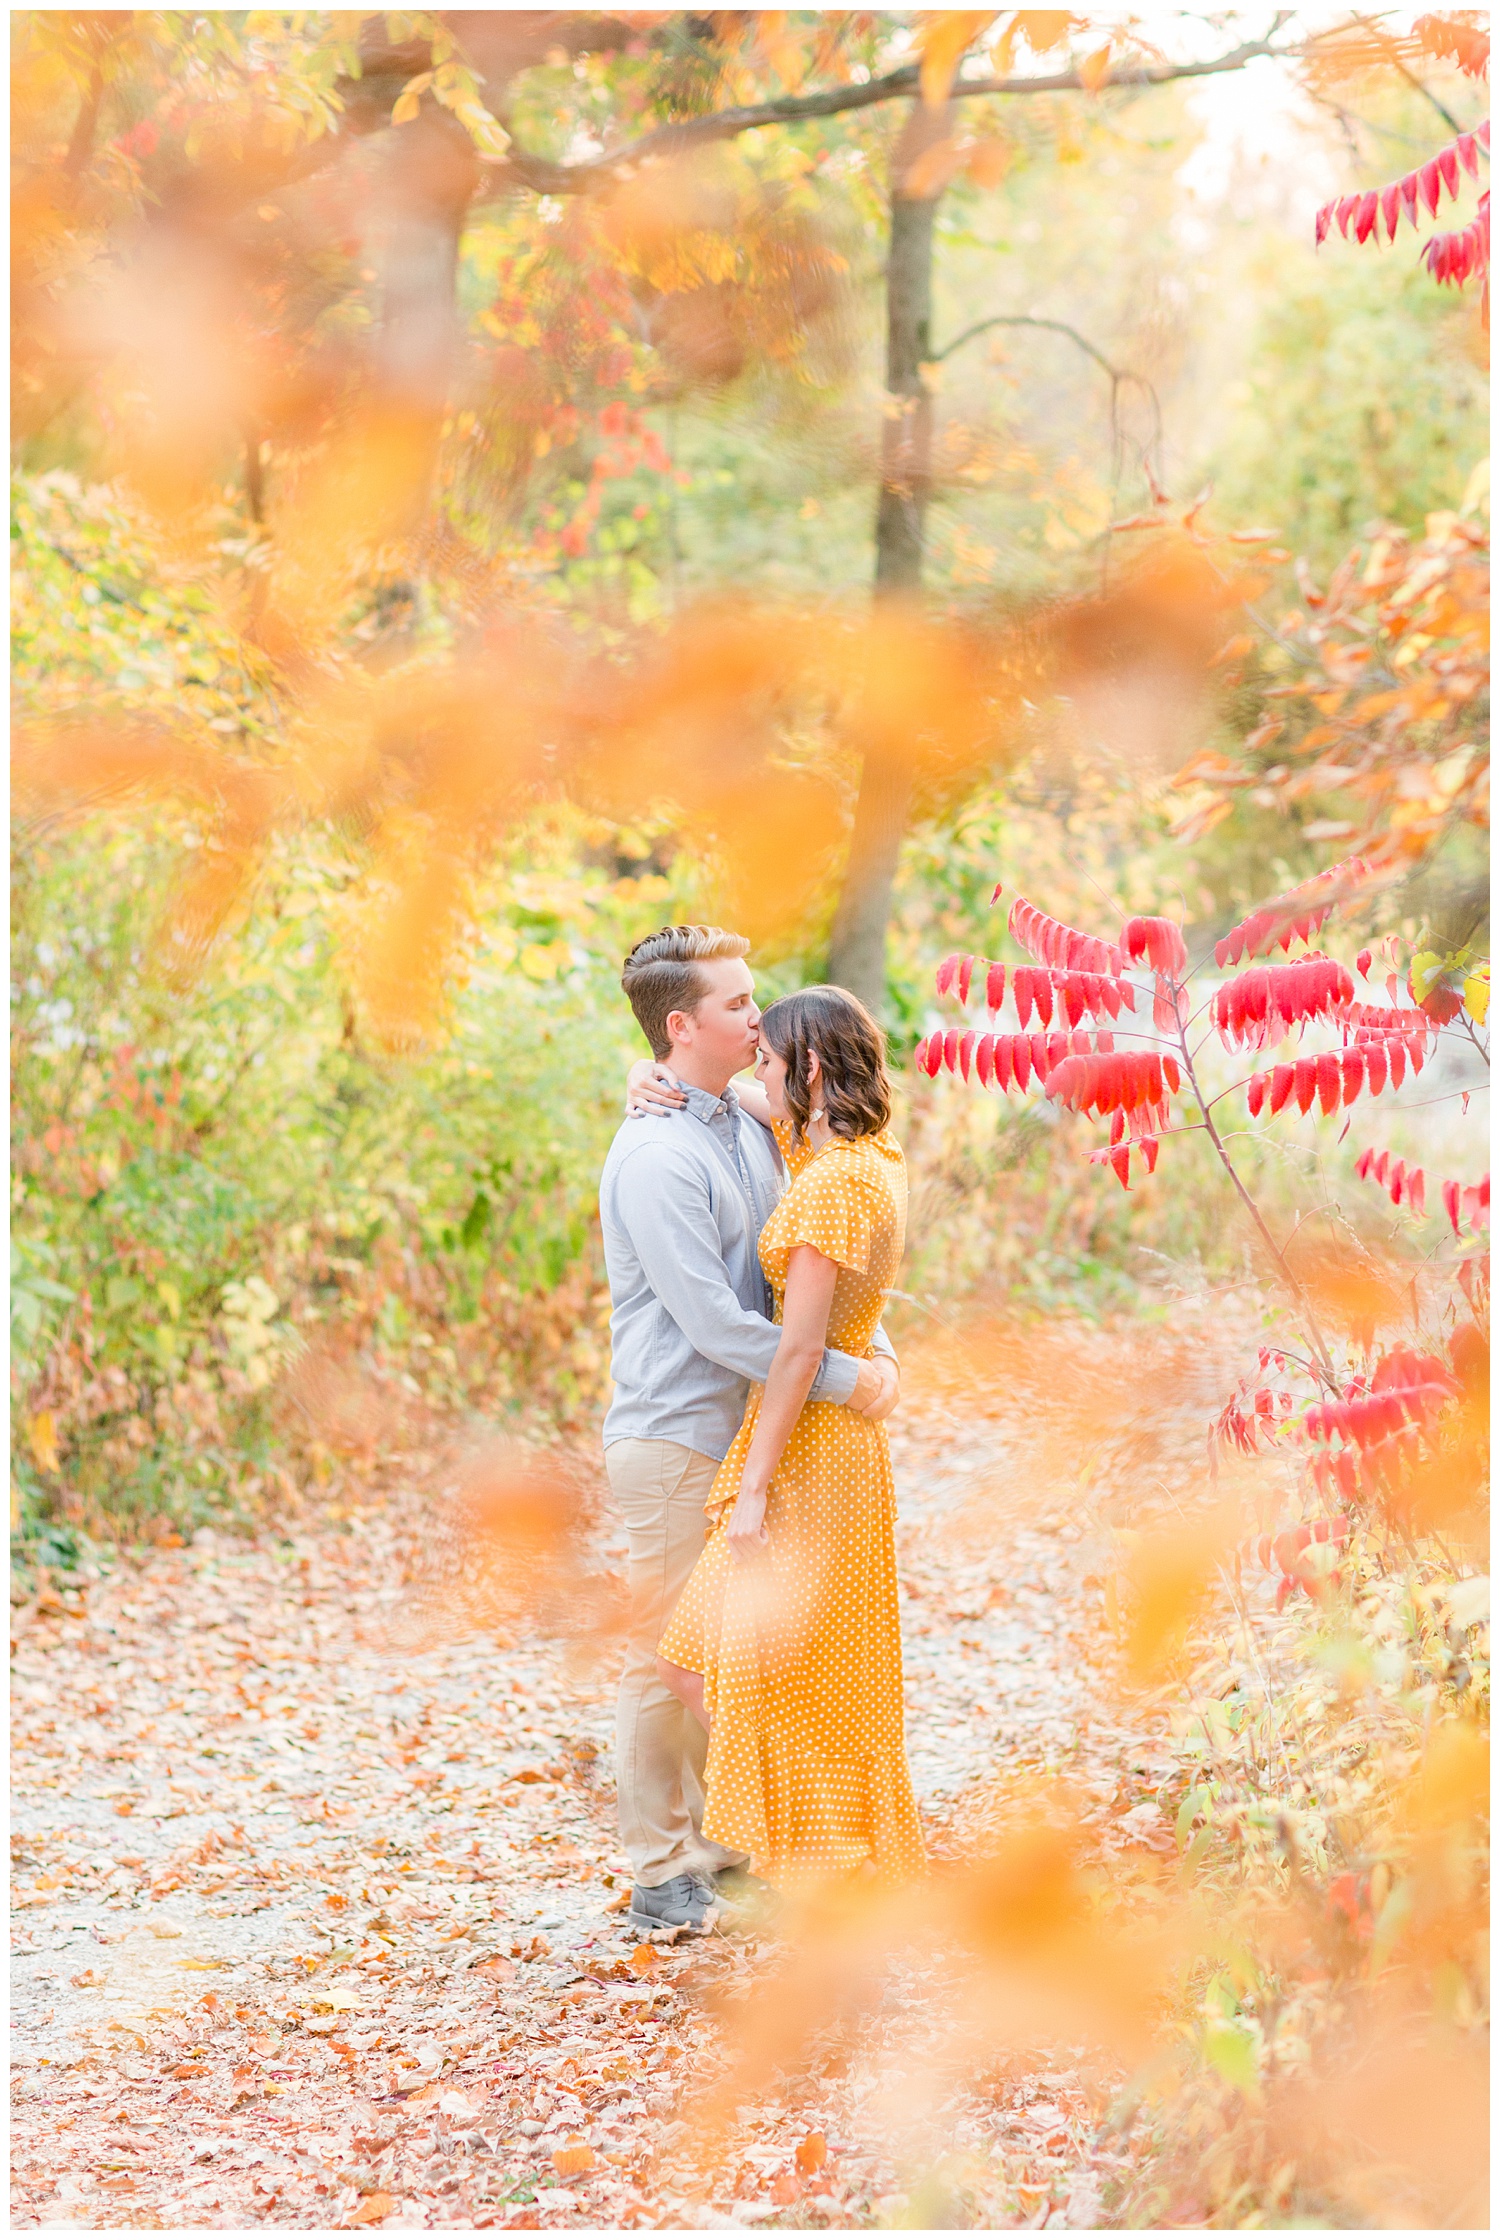 Luke kisses his girl on the forehead as they embrace in the middle of a fall wooded driveway | Iowa Wedding Photographer